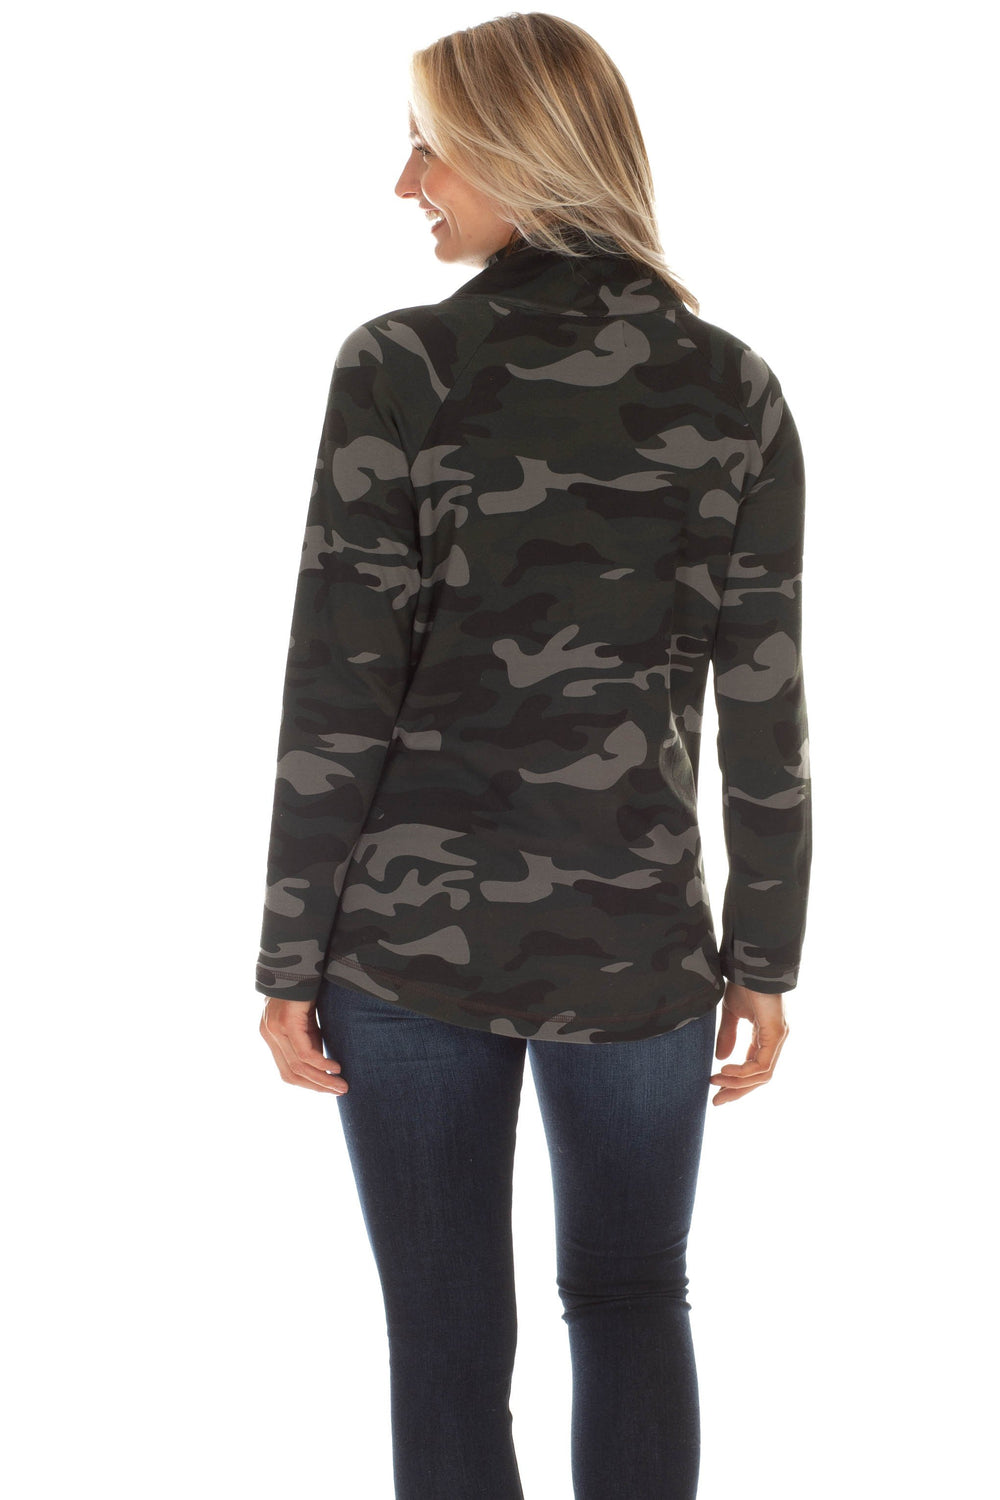 Lexington Long Sleeve Sweatshirt
The Lexington Sweatshirt is one of our best-sellers this season! The interlock-modal fabric gives a comfortable texture you can't beat! Wear the Lexington Sweatshirt while binge watching Netflix, or while going to a Haunted House this fall! Camo Gold zipper detailing Relaxed fit Size small measures 23 3/4" from highest shoulder point Model is 5'10" and is wearing a S 66% Modal, 29% Nylon, 5% Spandex Machine wash on cold, hang to dry Made in Peru
Lexington Long Sleeve Sweatsh